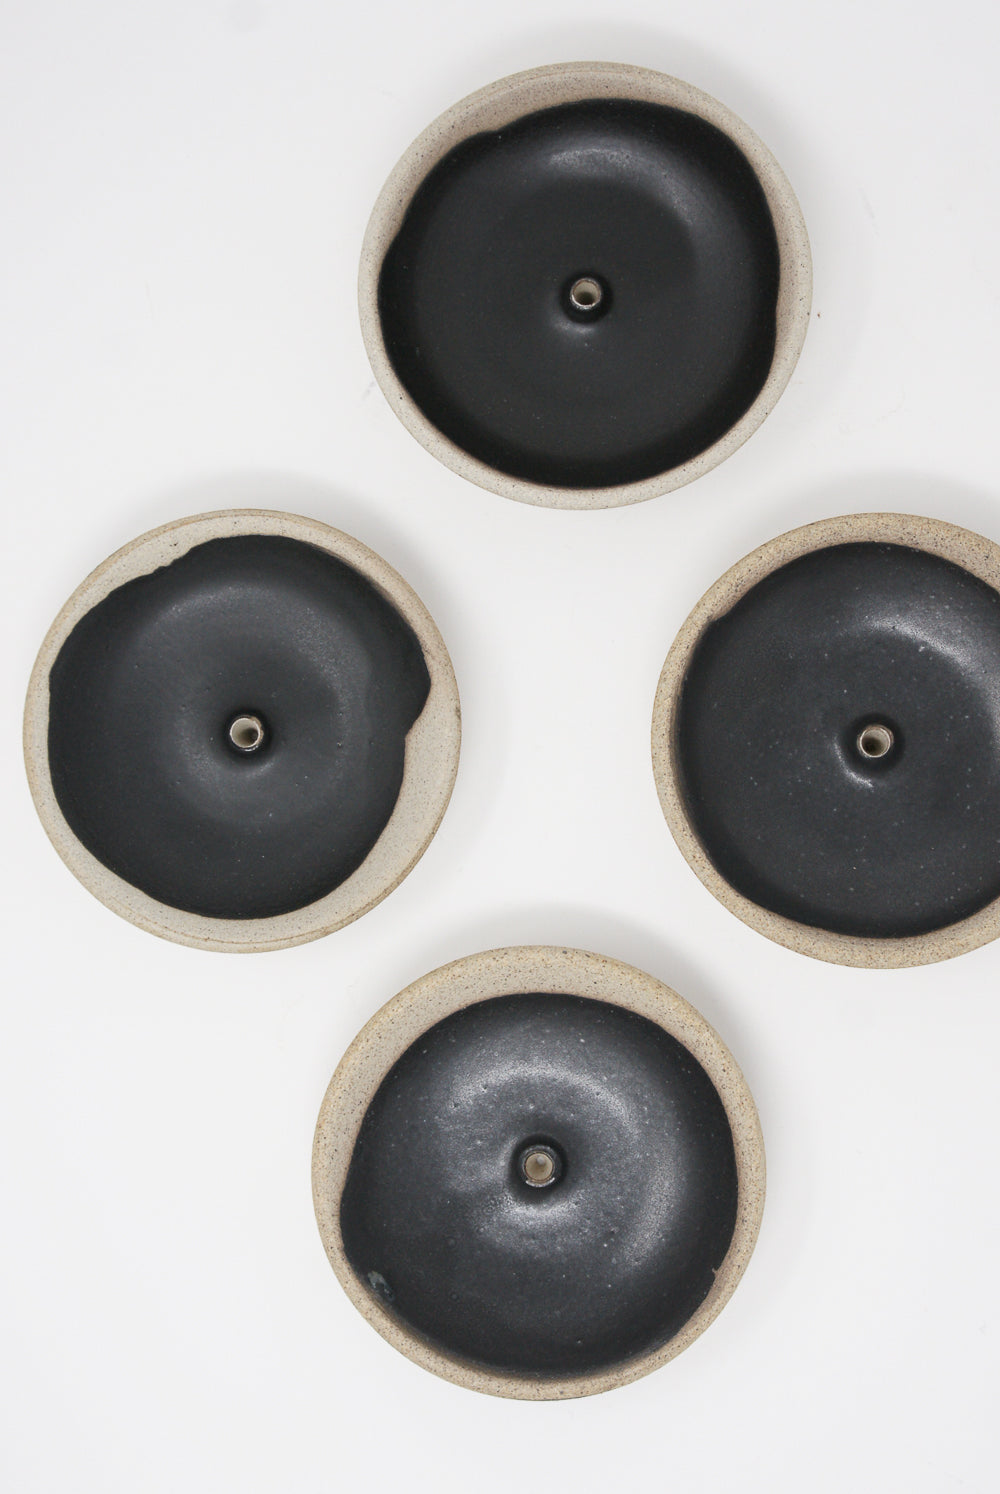 Incausa - Stoneware Incense Holder in Black group view